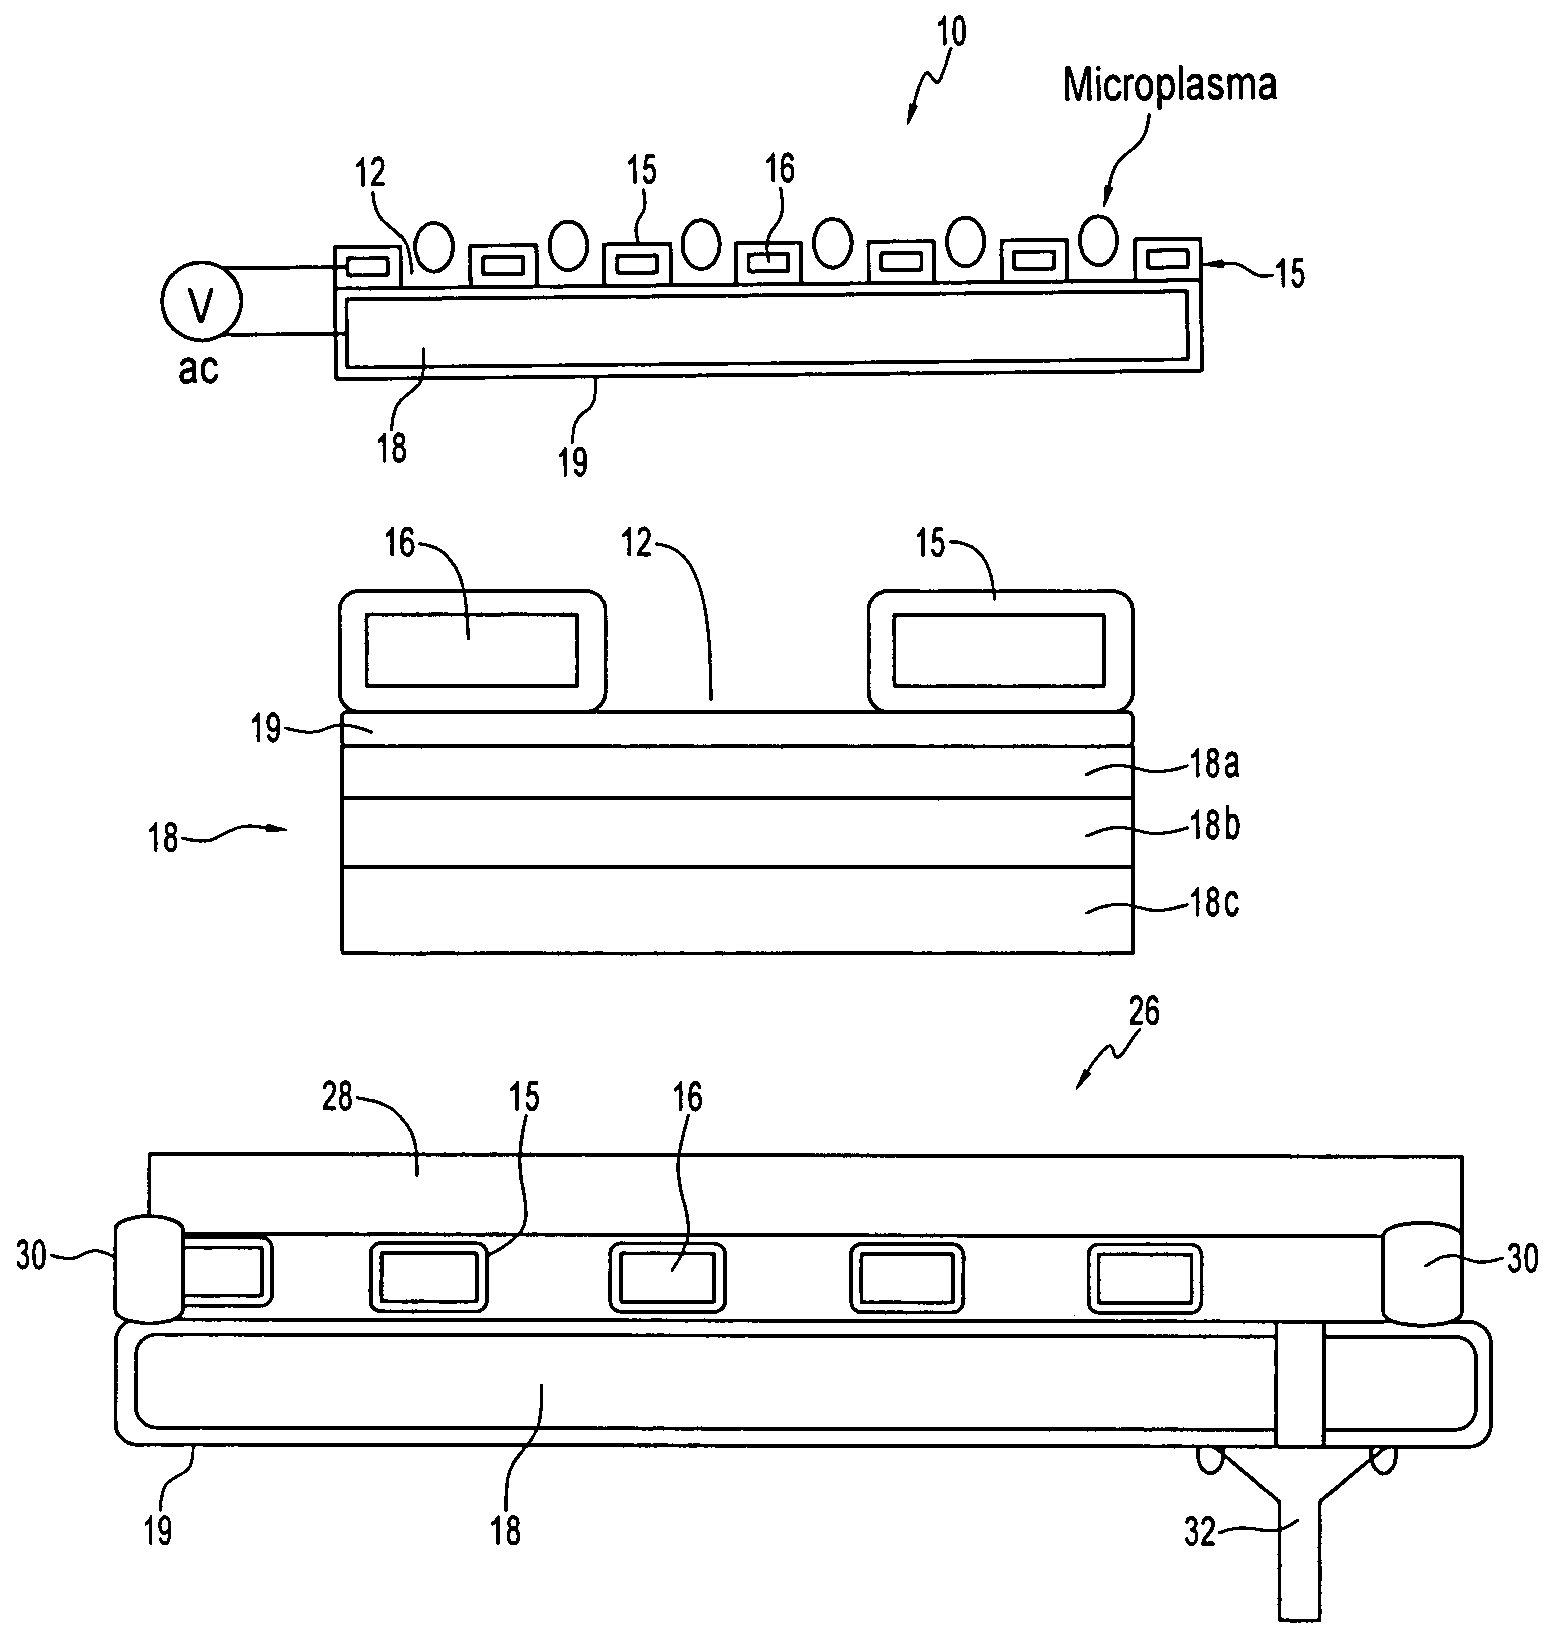 Arrays of microcavity plasma devices with dielectric encapsulated electrodes